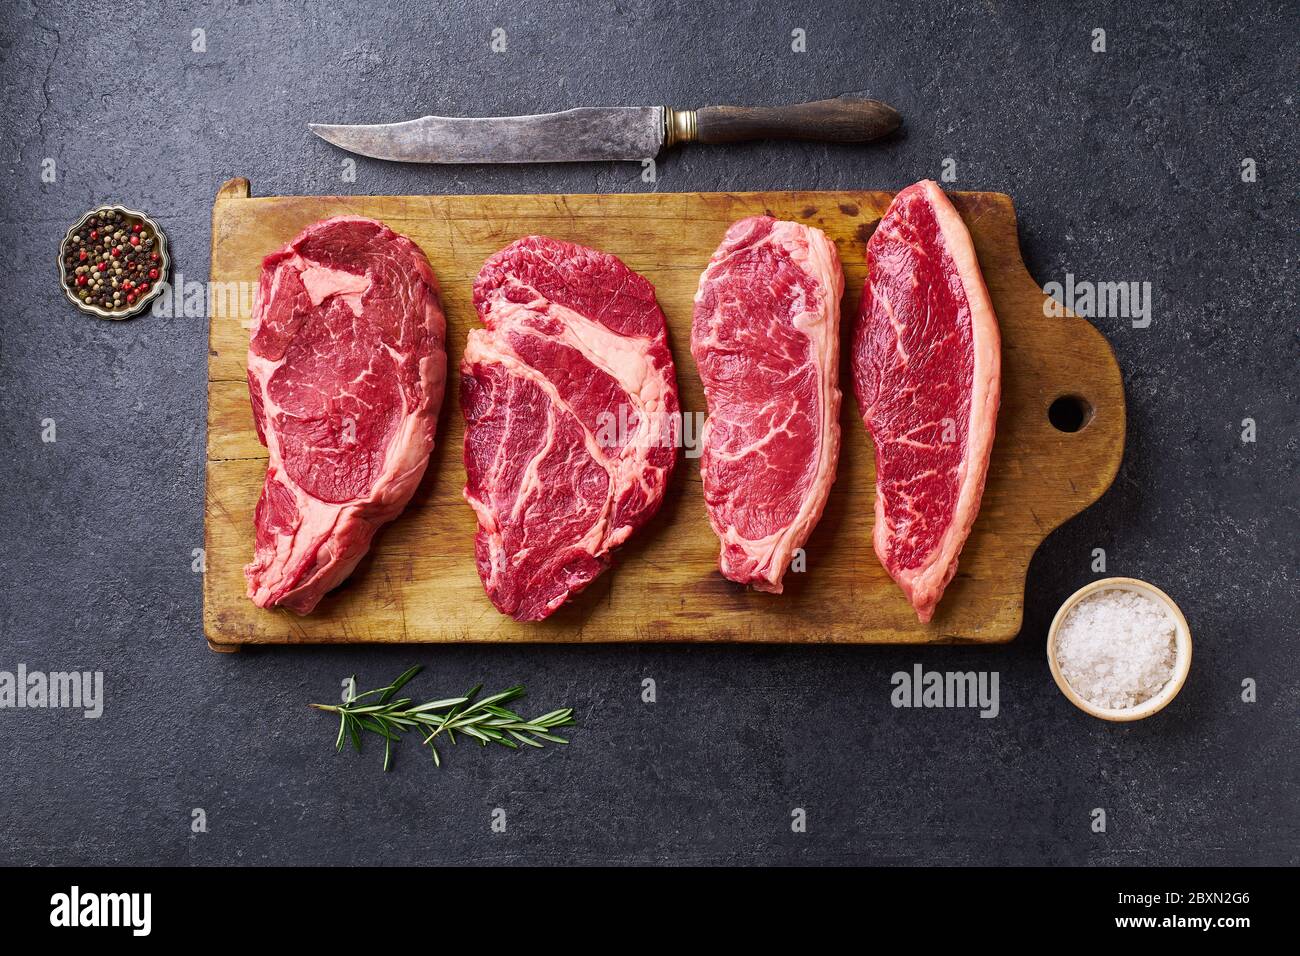 Variety of fresh Black Angus Prime raw beef steakes: ribeye, striploin, chuck roll and picanha on wooden cutiing board Stock Photo